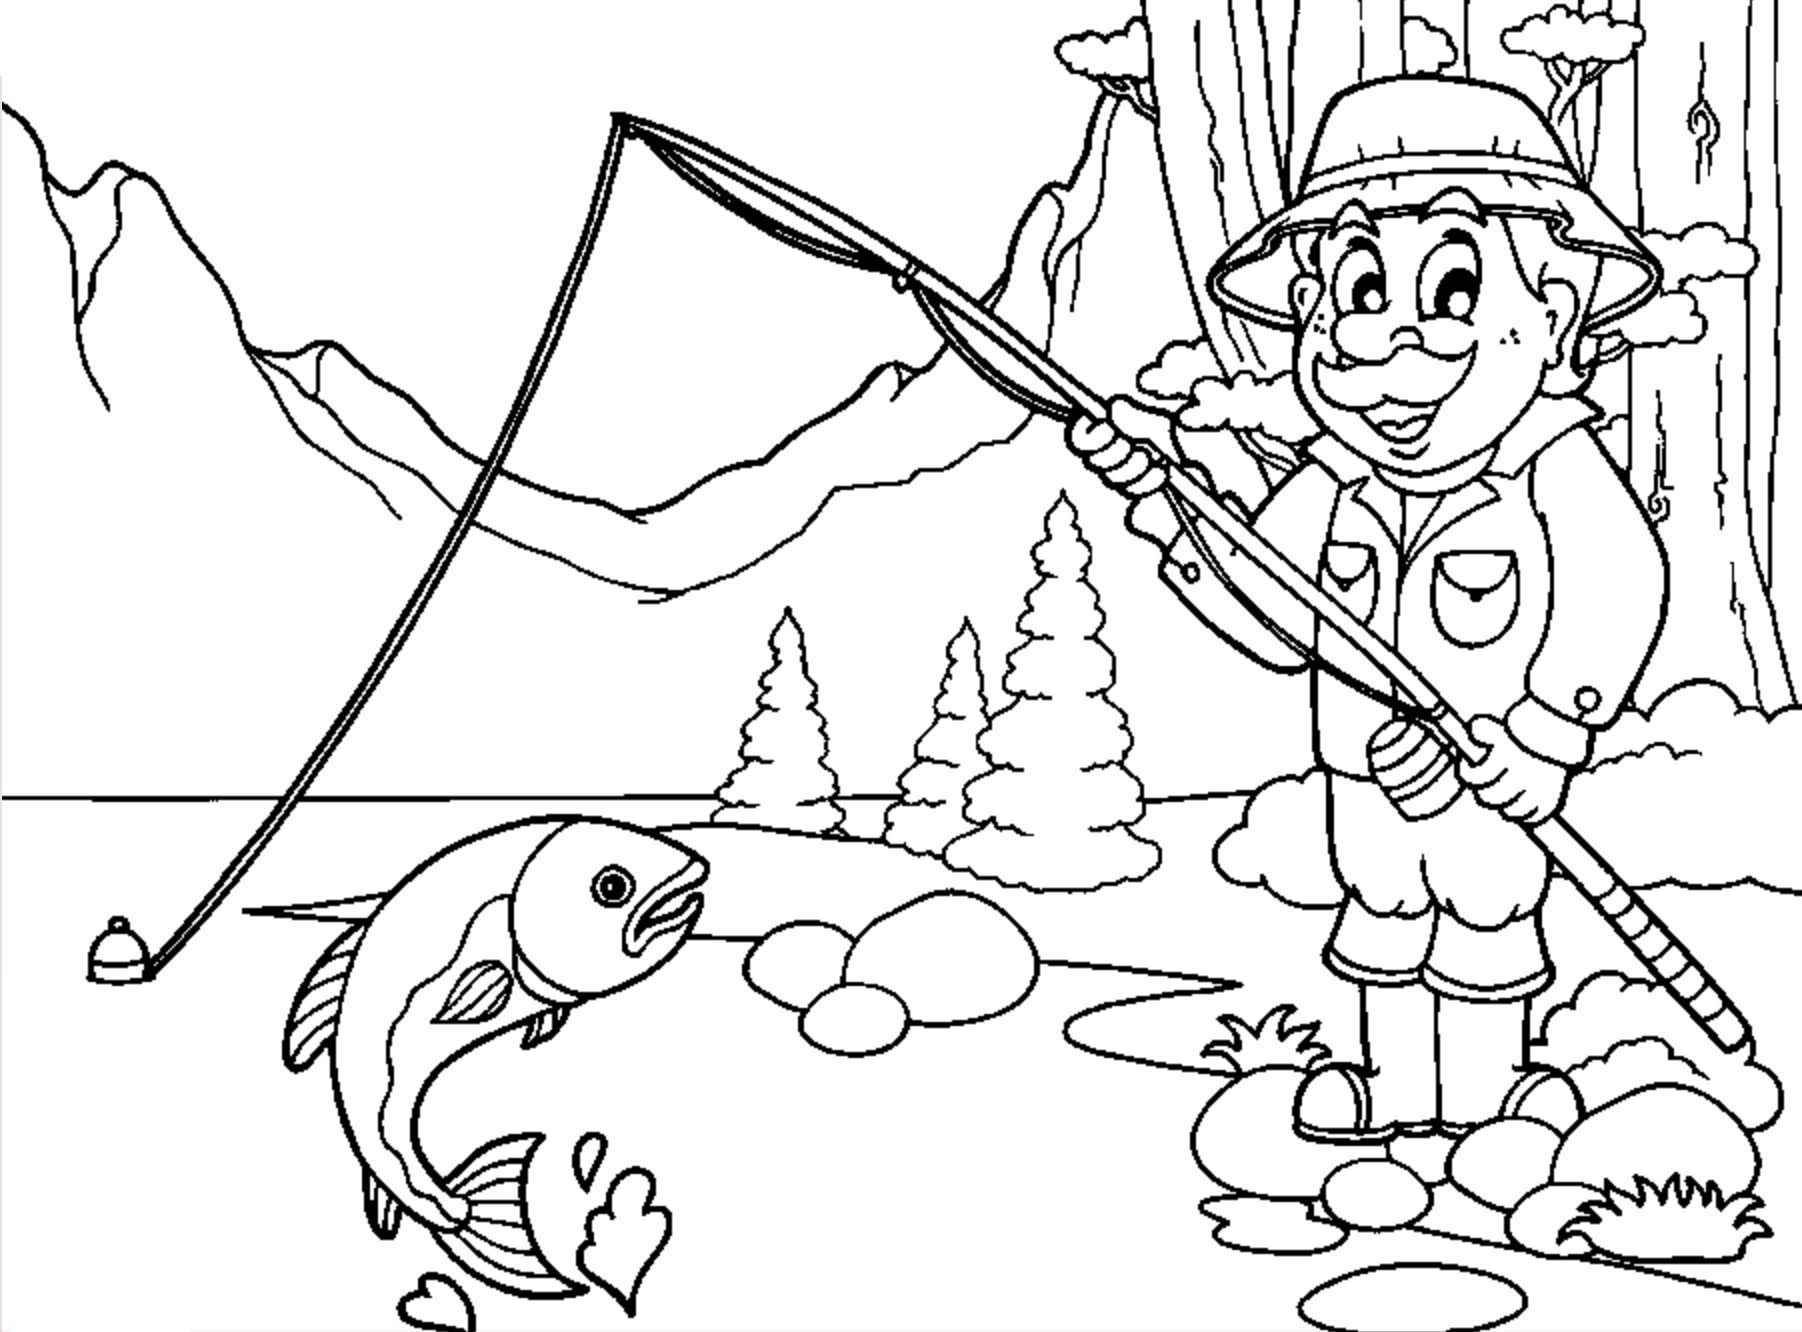 Fisherman on a Lake Landscape Coloring Page - Free Printable Coloring